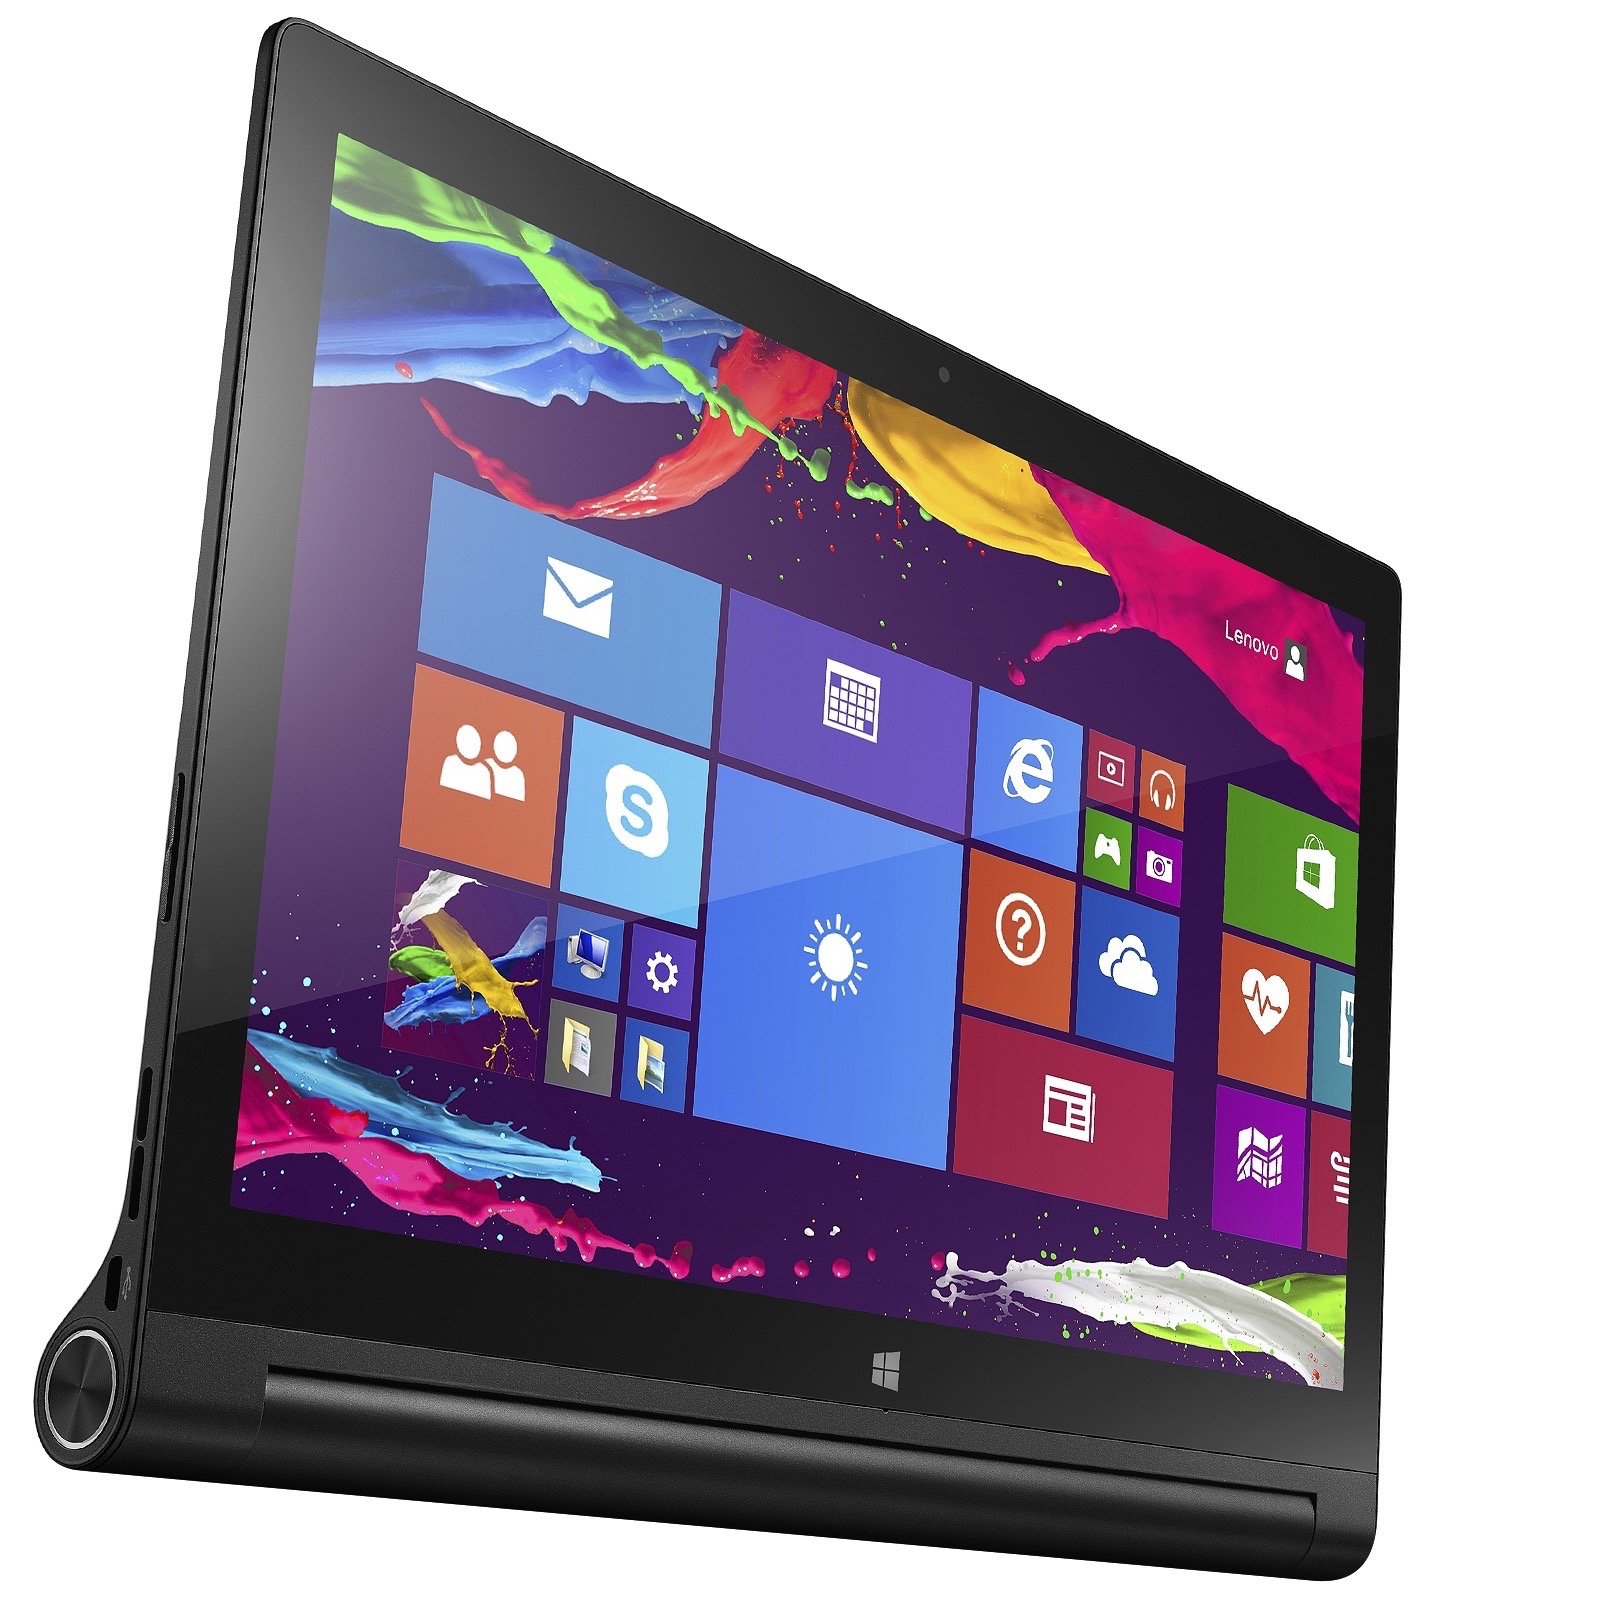 Lenovo-Yoga-Tablet-2-10-inch-topic-page-graphic.jpg